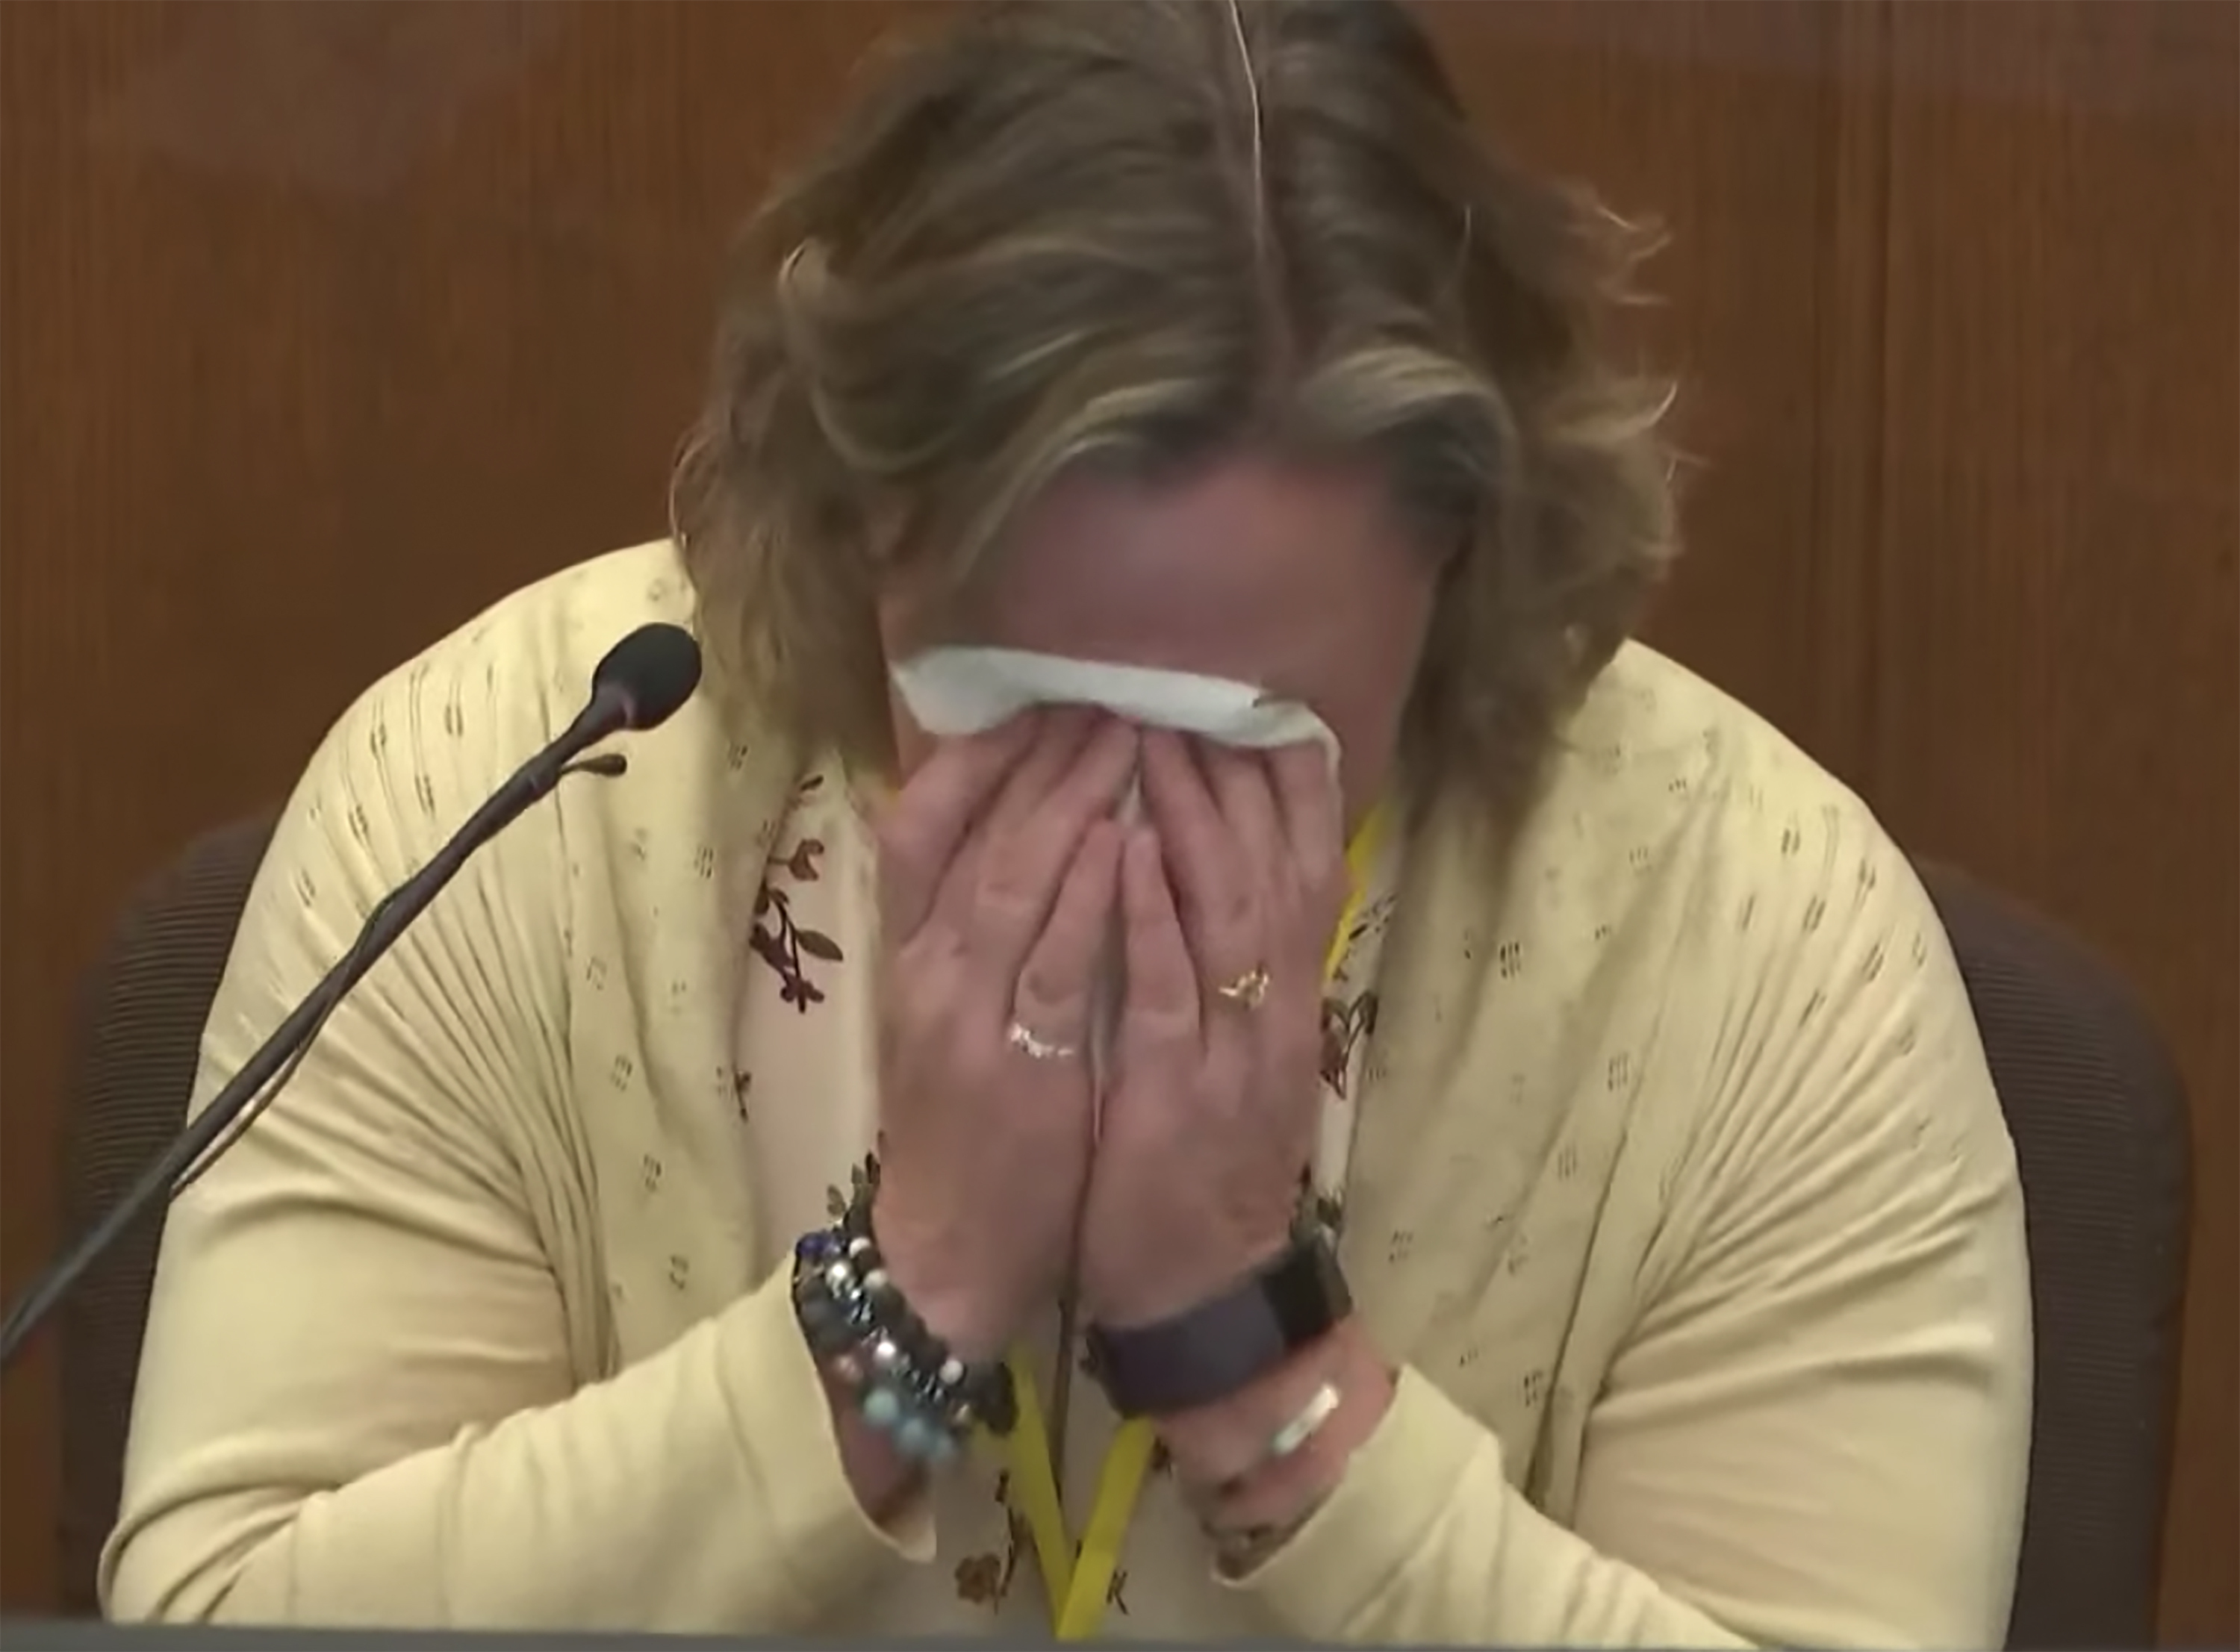 In this screen grab from video, former Brooklyn Center, Minn. police officer Kim Potter breaks down while describing for a jury the seconds in which Daunte Wright was shot dead during a traffic stop in April 2021. Potter, testifying Dec. 17 in her manslaughter trial in Minneapolis, says she accidentally grabbed her gun instead of her taser. (Court TV/AP/Pool)